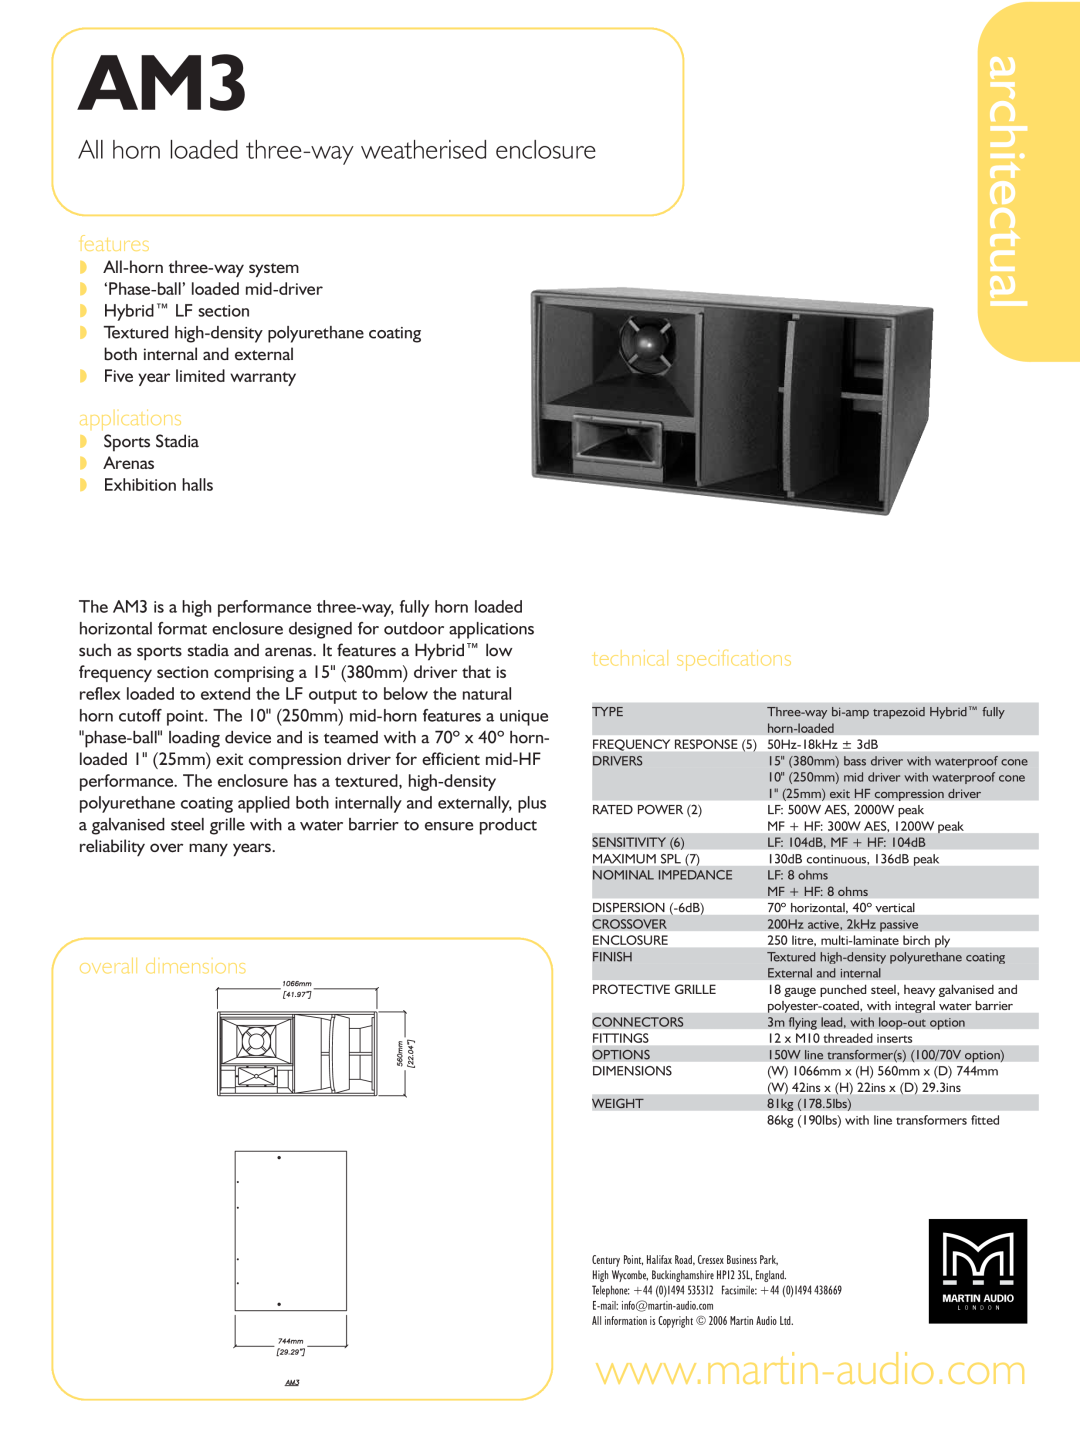 Martin Audio AM3 technical specifications architectual, All horn loaded three-wayweatherised enclosure, features 